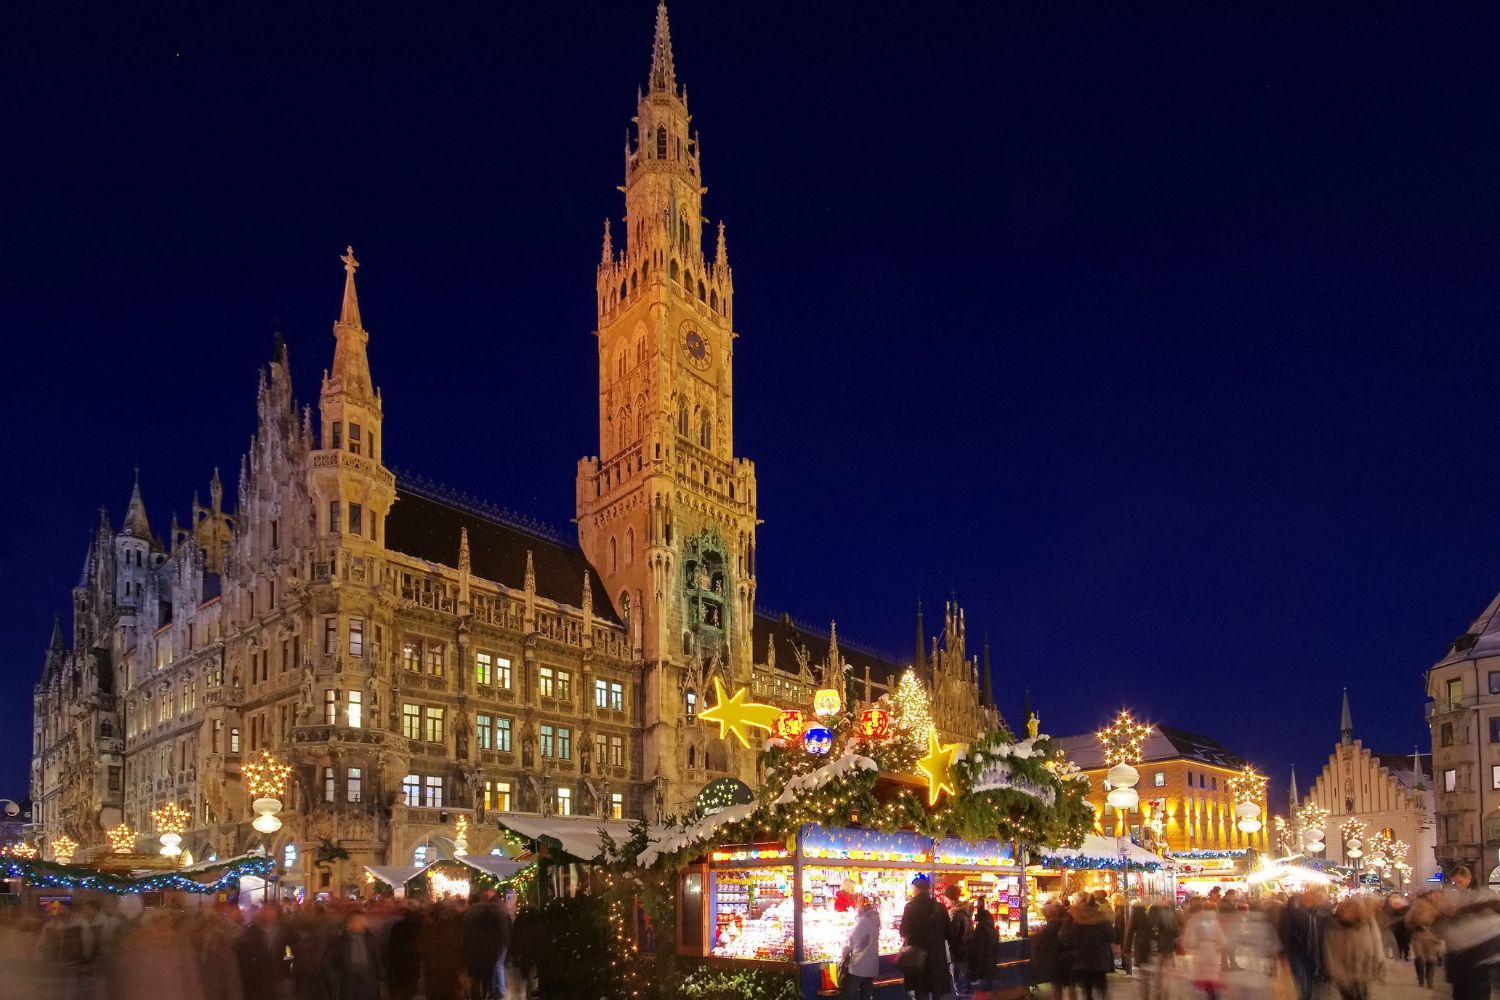 Visit Munich in winter with the fabulous Christmas market in front of the Neues Rathause on Marienplatz